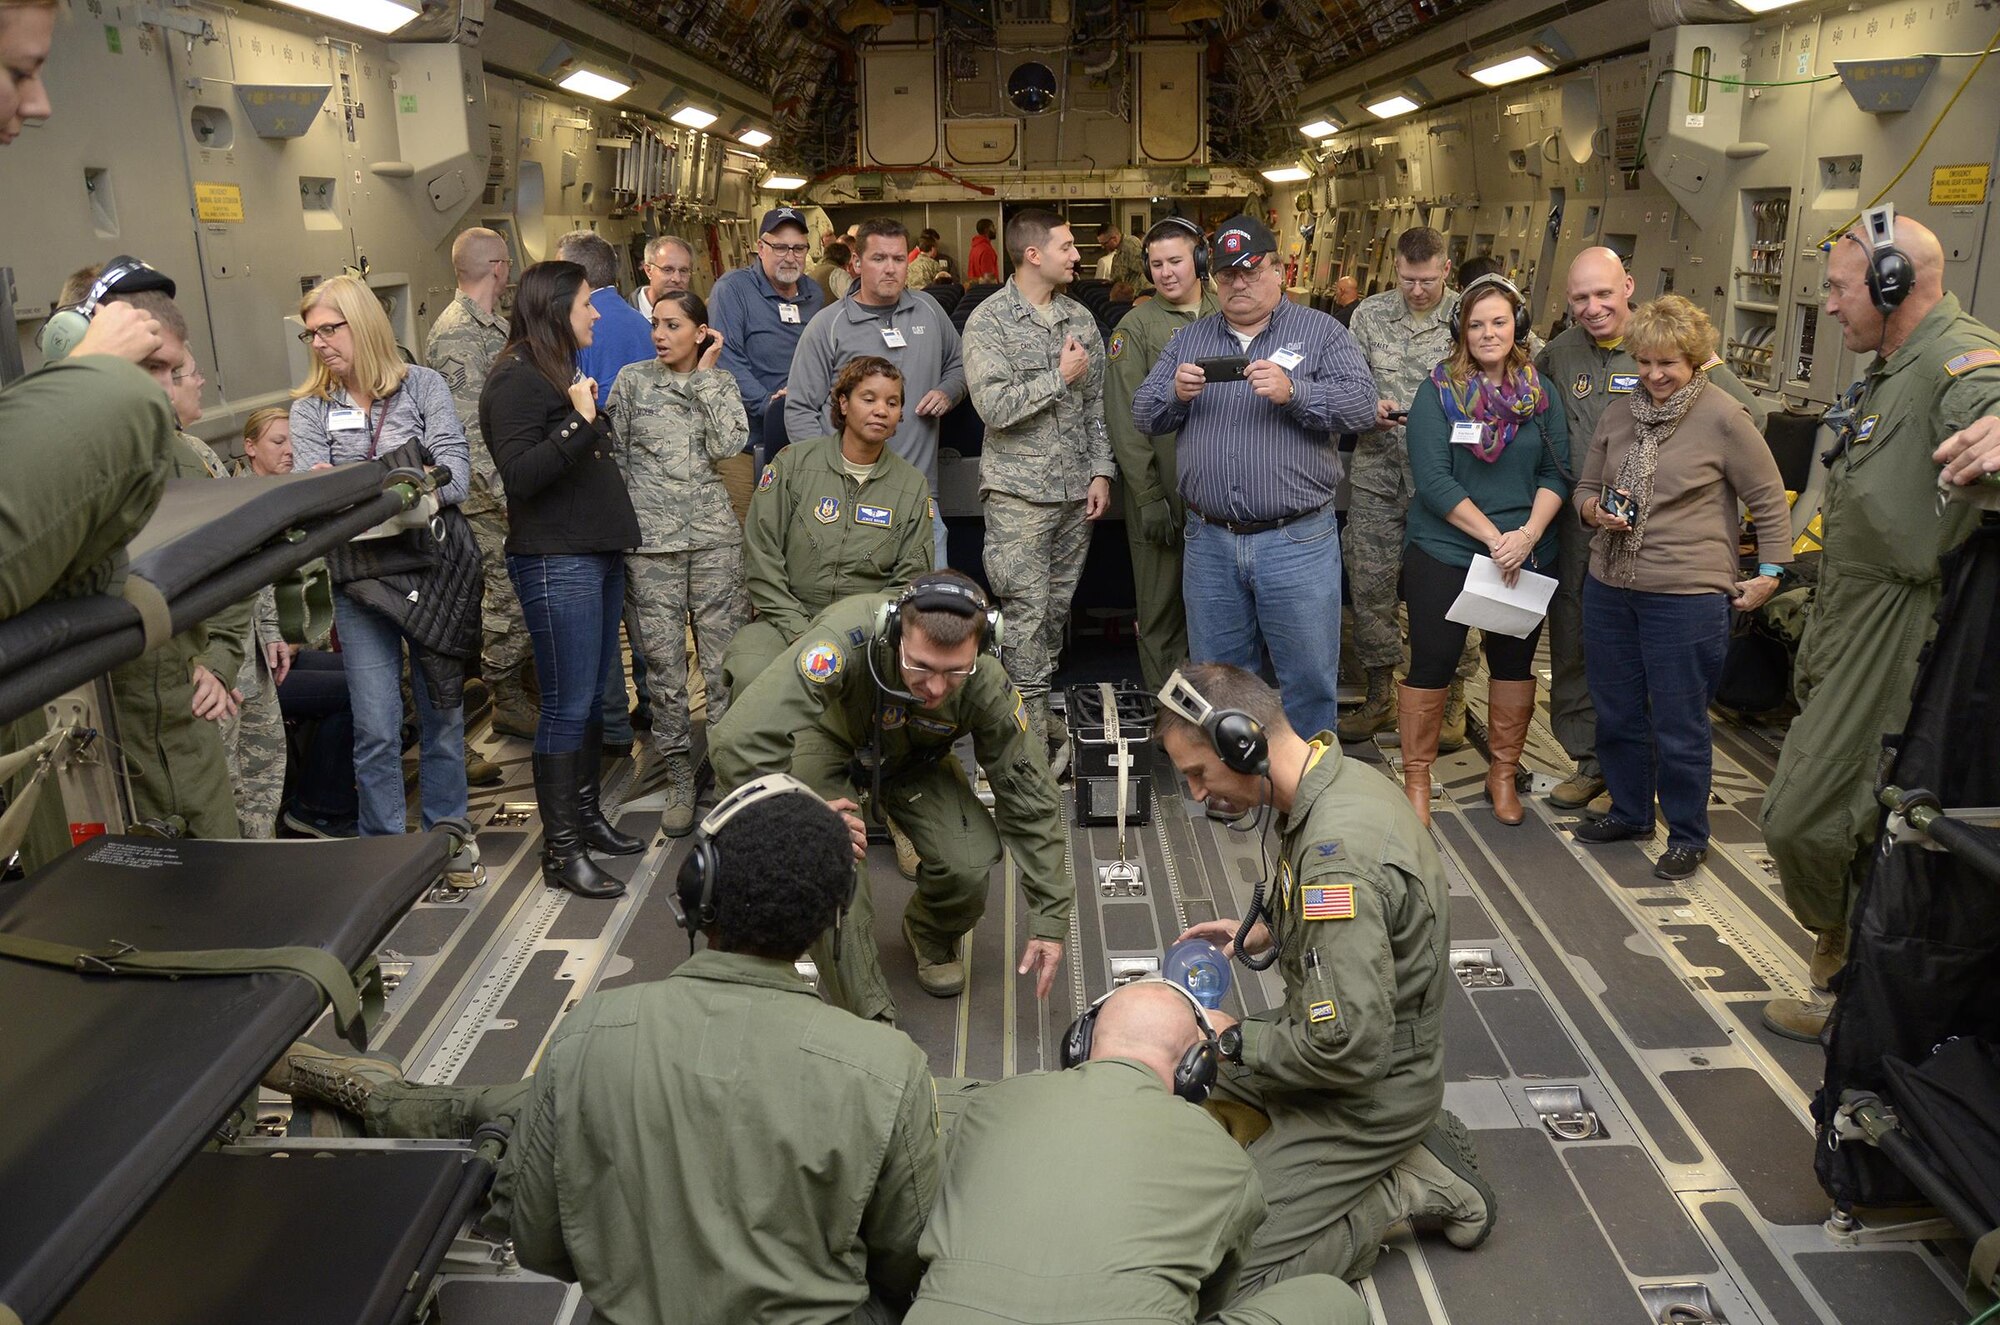 Employers participating in the 445th Airlift Wing Employers Day Nov. 5, 2016 watch a medical scenario performed by the 445th Aeromedical Evacuation Squadron during a C-17 Globemaster III flight. Approximately 70 employers and 35 reservists enjoyed breakfast and lunch, received a flight, participated in tours and demonstrations of the different jobs and training that their Air Force Reserve employees do when performing military service. The employers also received information about the Employer Support of the Guard and Reserve program. (U.S. Air Force photo/Staff Sgt. Joel McCullough)